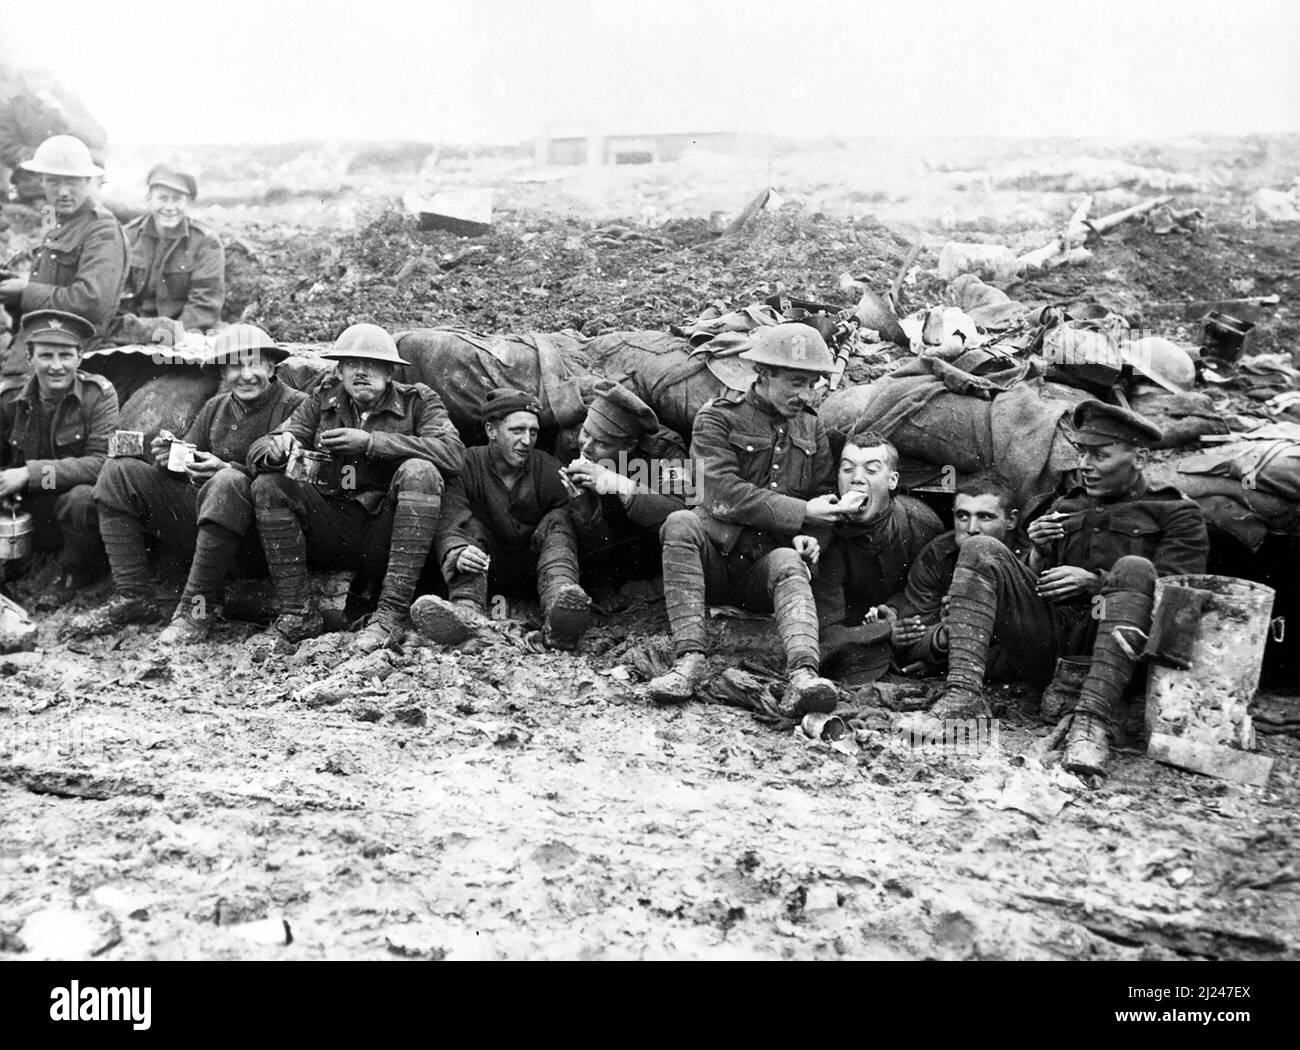 Soldiers of the Canadian Expeditionary Force, possibly 25th Battalion (Nova Scotia Rifles) of the 5th Infantry Brigade, 2nd Infantry Division eating rations whilst seated on muddy ground outside a shelter near Pozieres, October 1916, during the final stages of the Battle of the Somme, possibly during the Battle of Le Transloy. Stock Photo